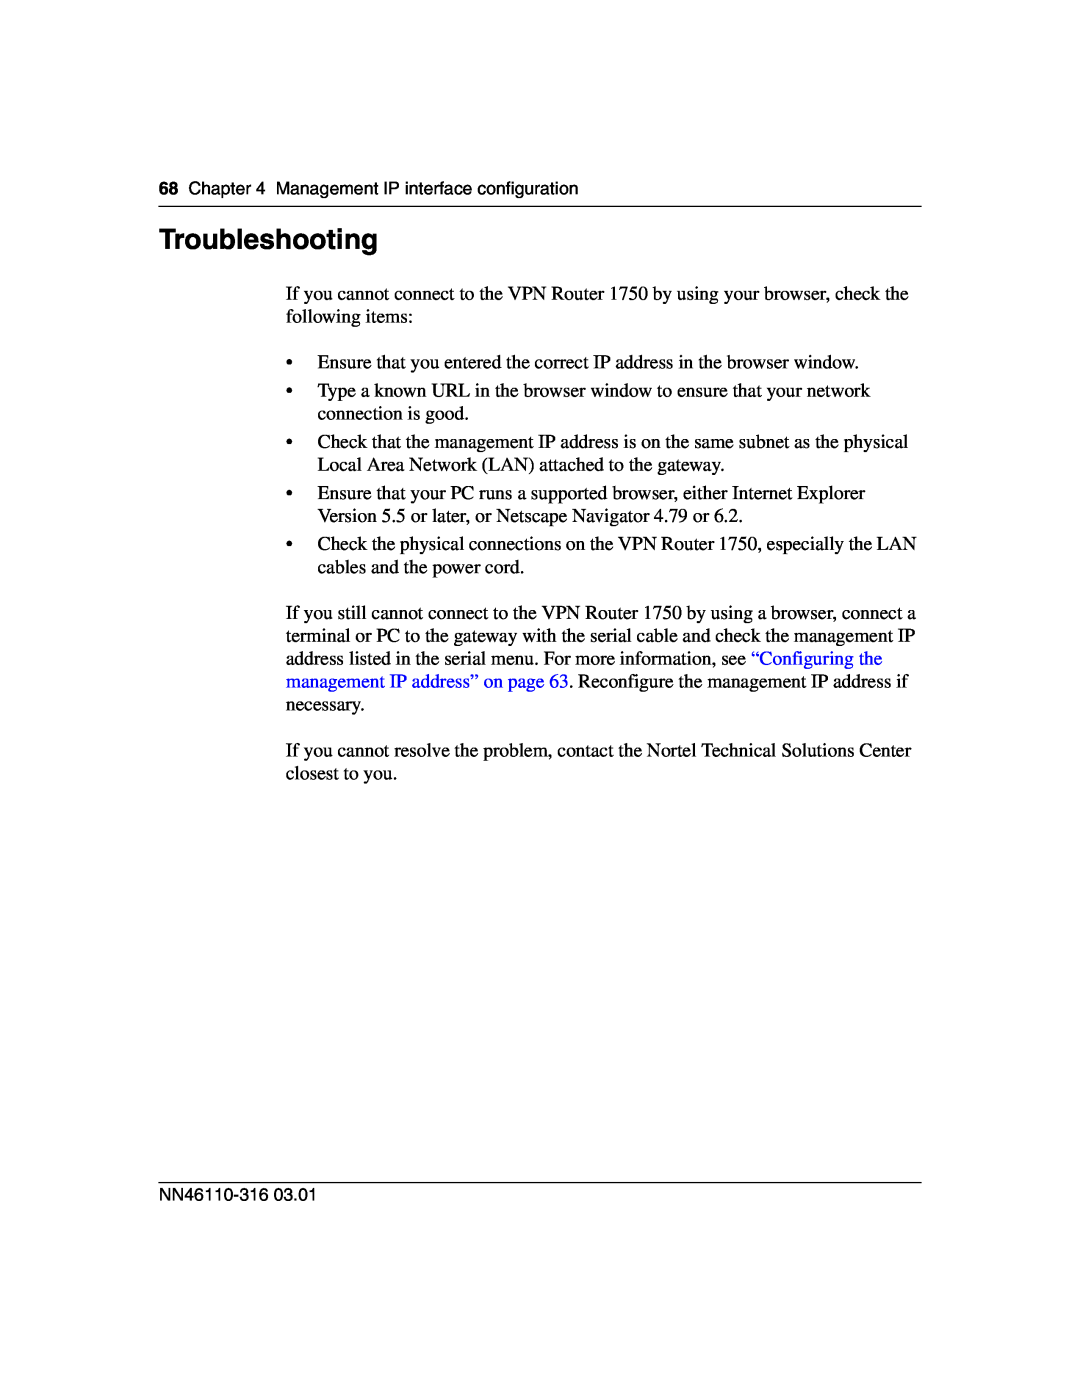 Nortel Networks 1750 manual Troubleshooting 